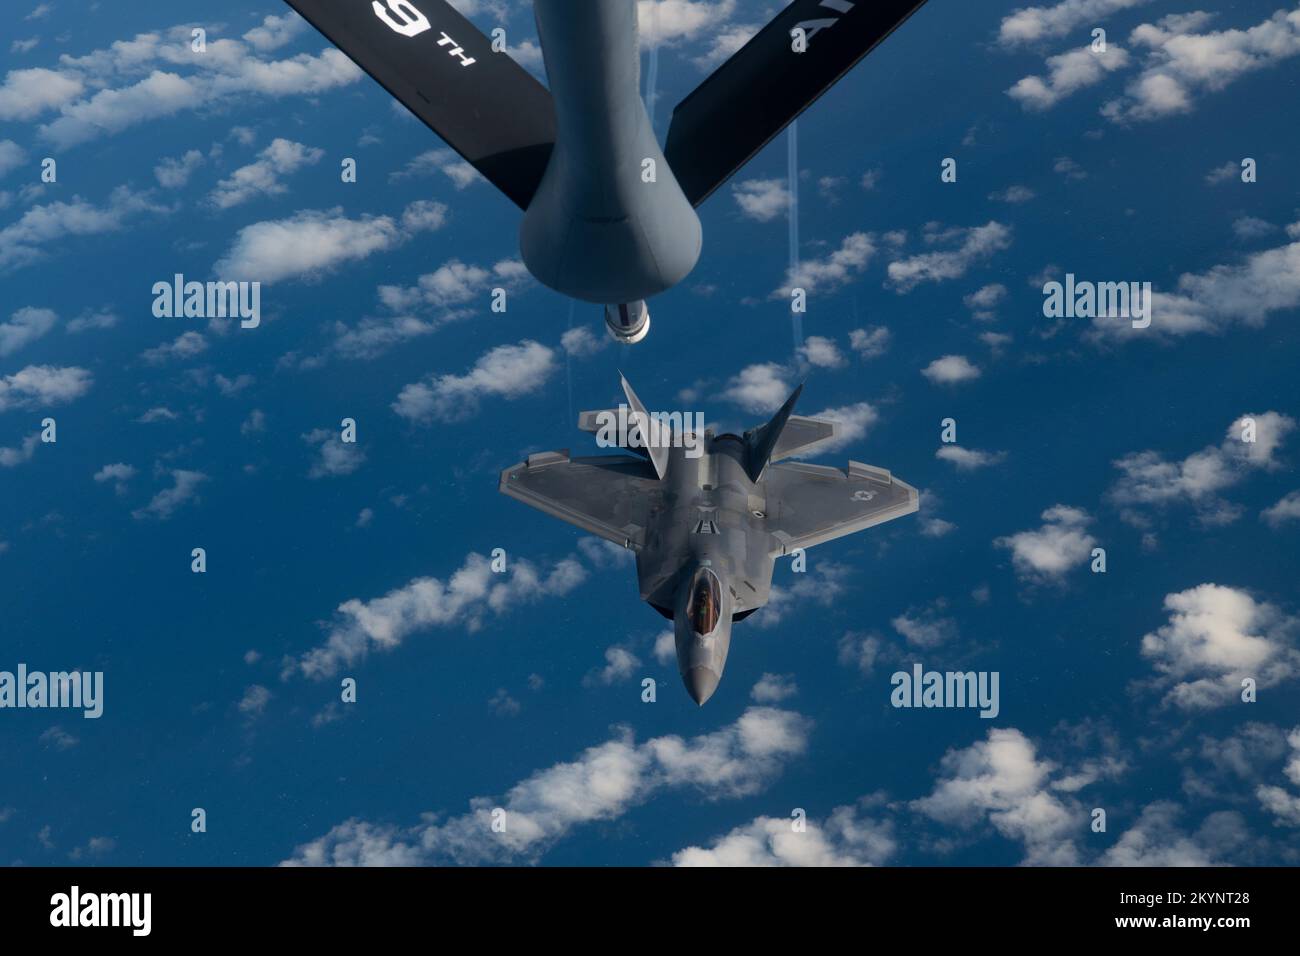 Pacific Ocean, International Waters. 30th Nov, 2022. Pacific Ocean, International Waters. 30 November, 2022. A U.S. Air Force F-22A Raptor fighter jet, assigned to the 3rd Fighter Wing, approaches a KC-135 Stratotanker refueling aircraft during a patrol mission, November 30, 2022 over the Pacific Ocean. Credit: A1C Tylir Meyer/U.S. Air Force/Alamy Live News Stock Photo